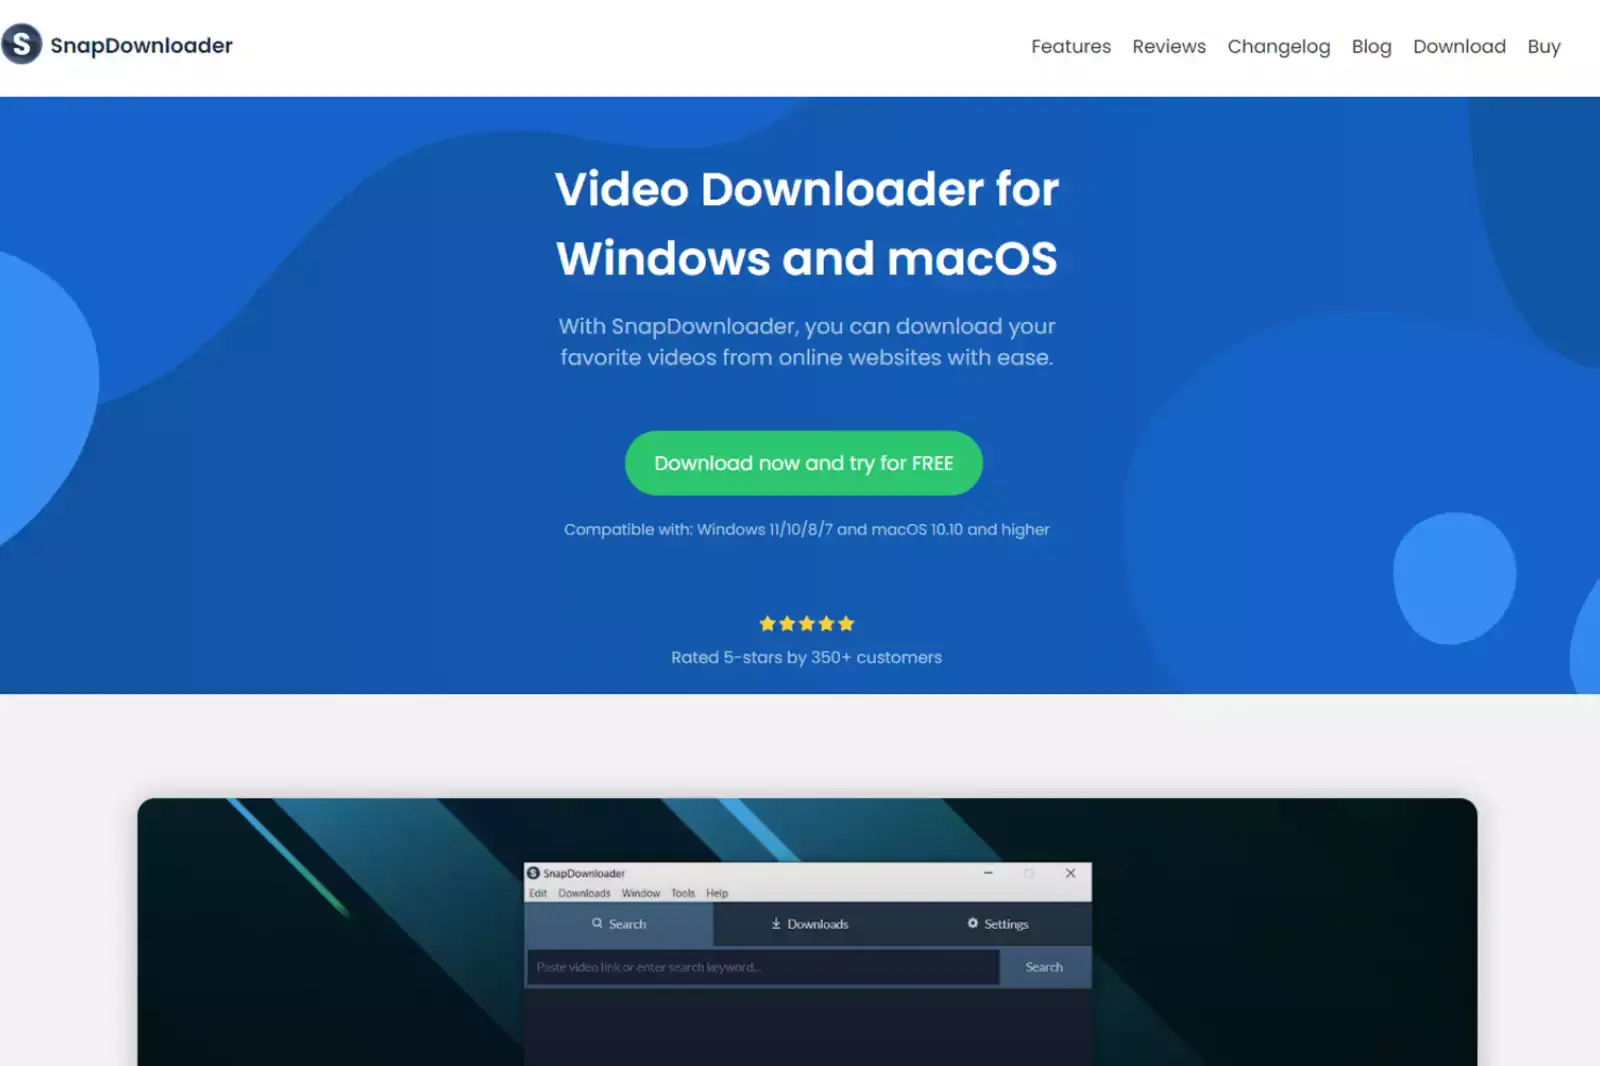 Home Page of SnapDownloader